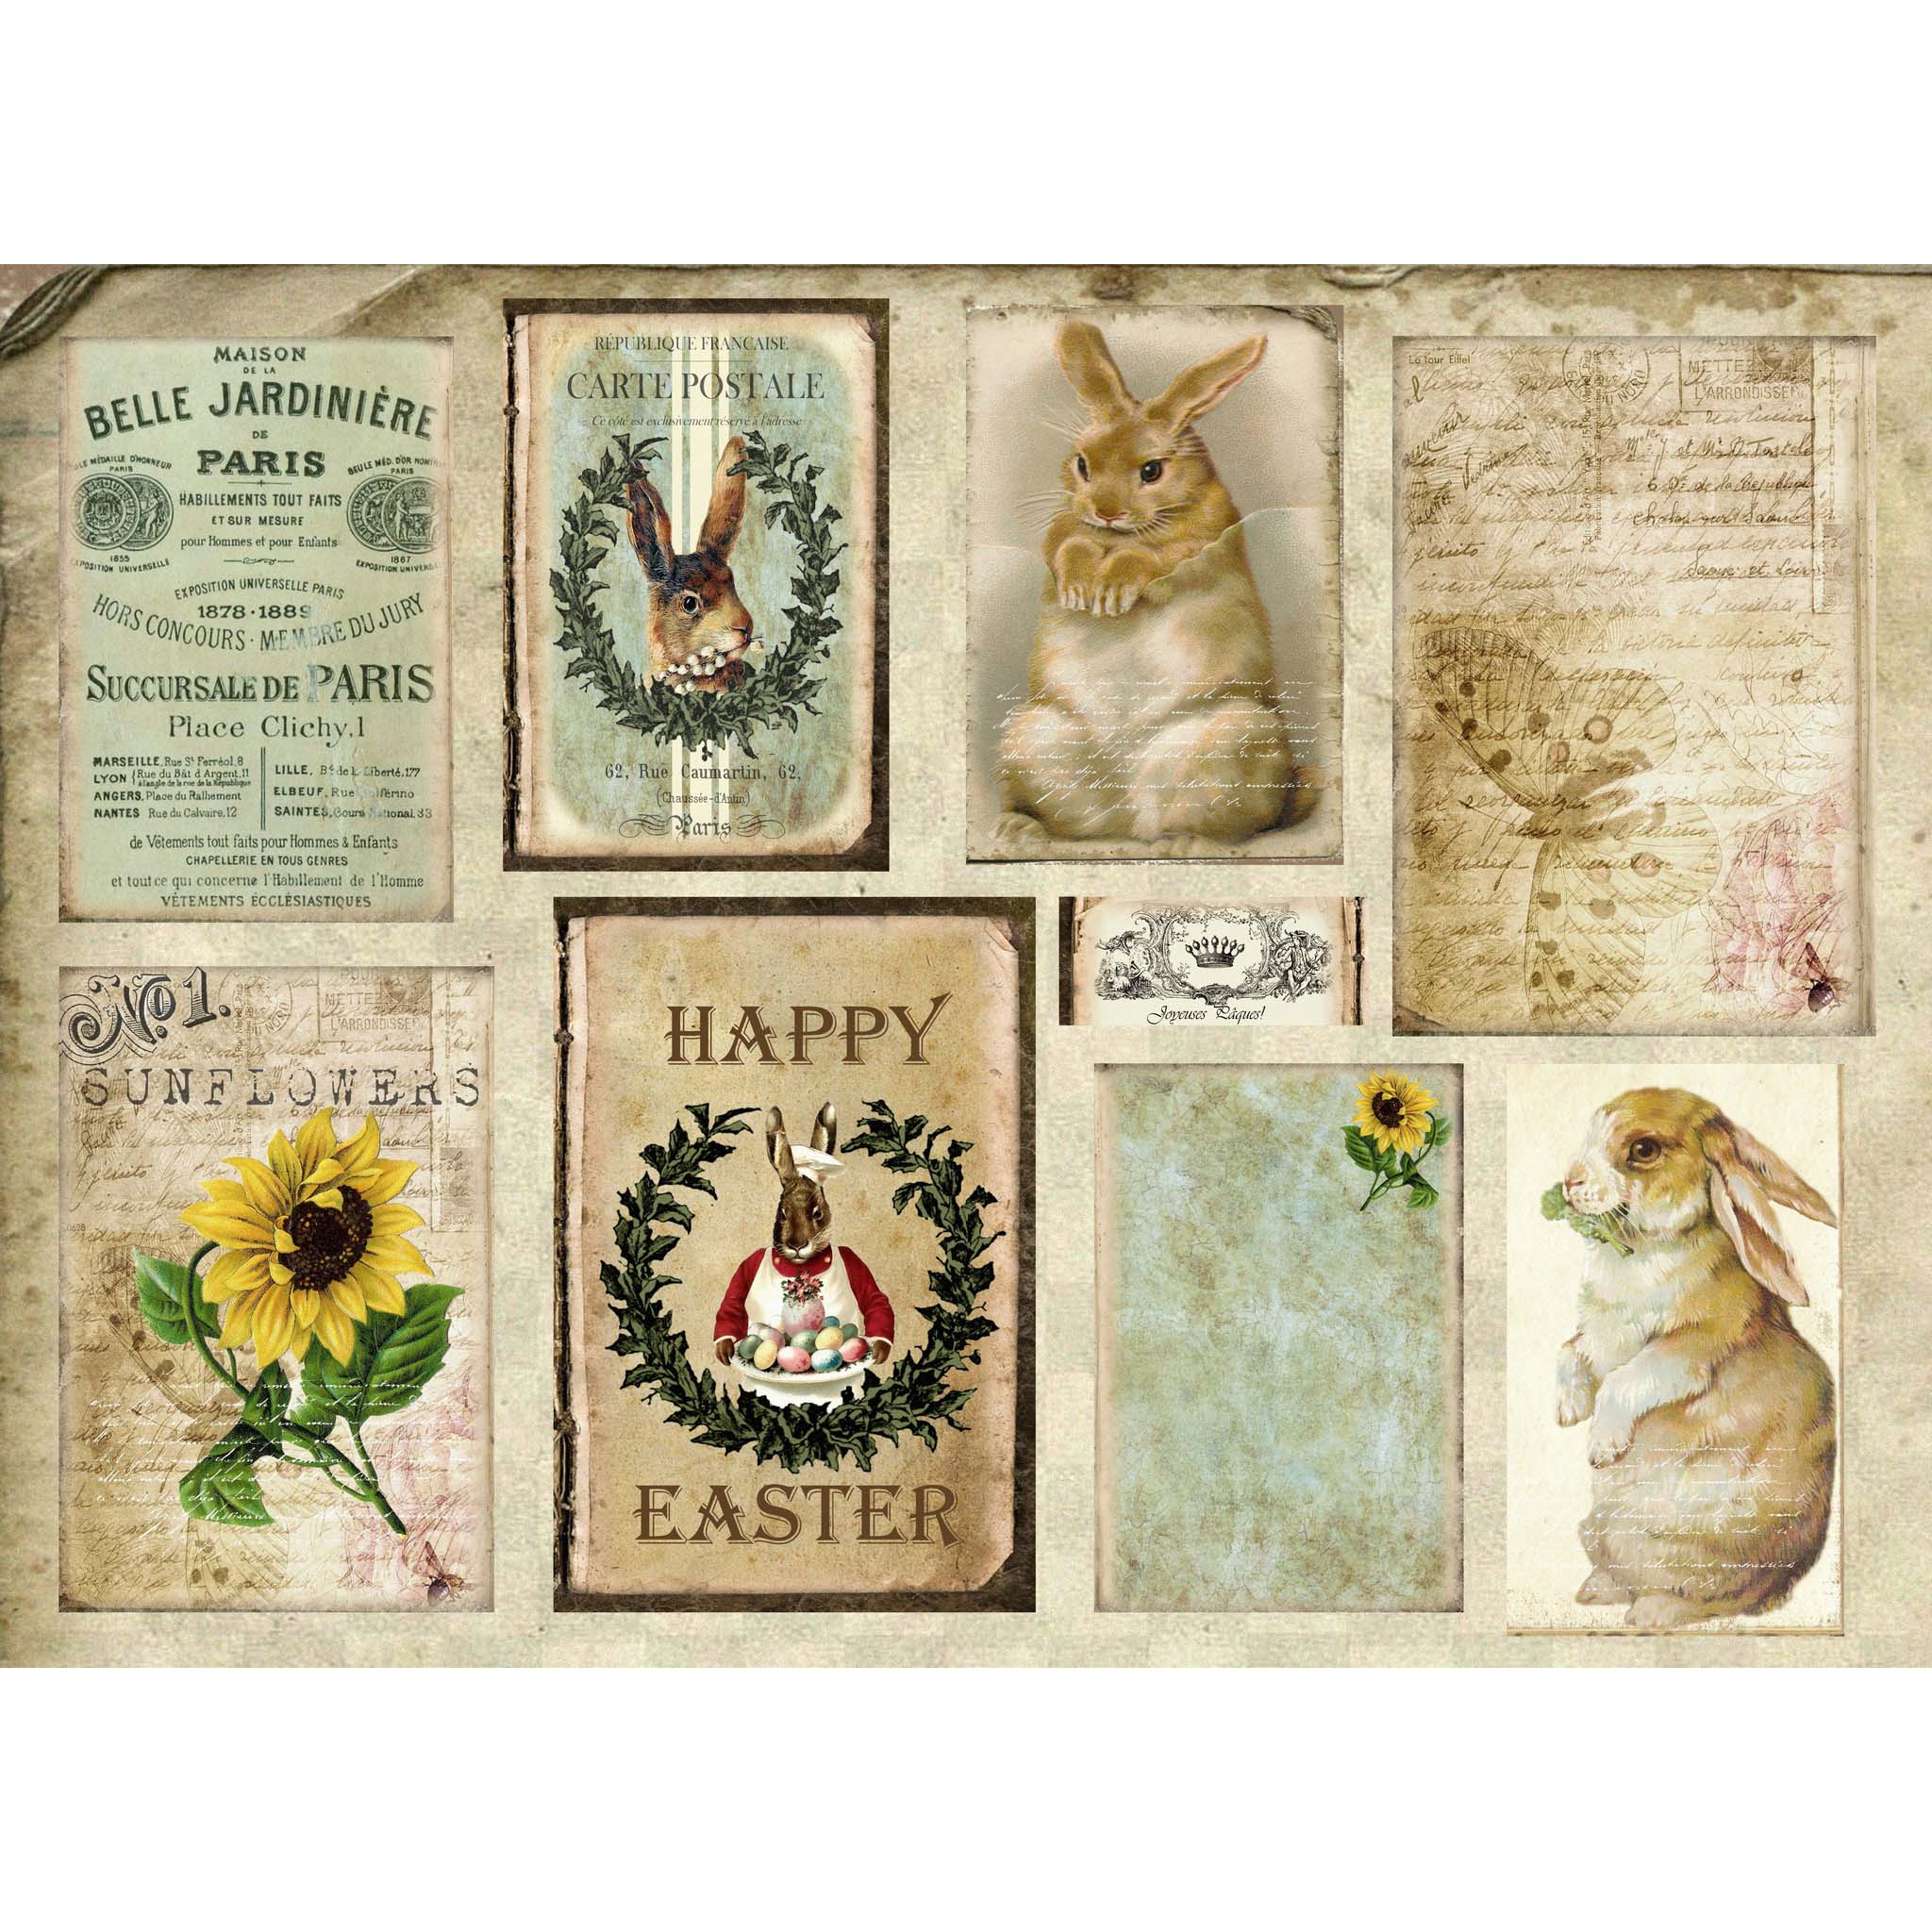 Tissue paper that features 9 unique vintage-style designs including bunnies, sunflowers, and an easter image, some set on old documents with French script. White borders are on the top and bottom.